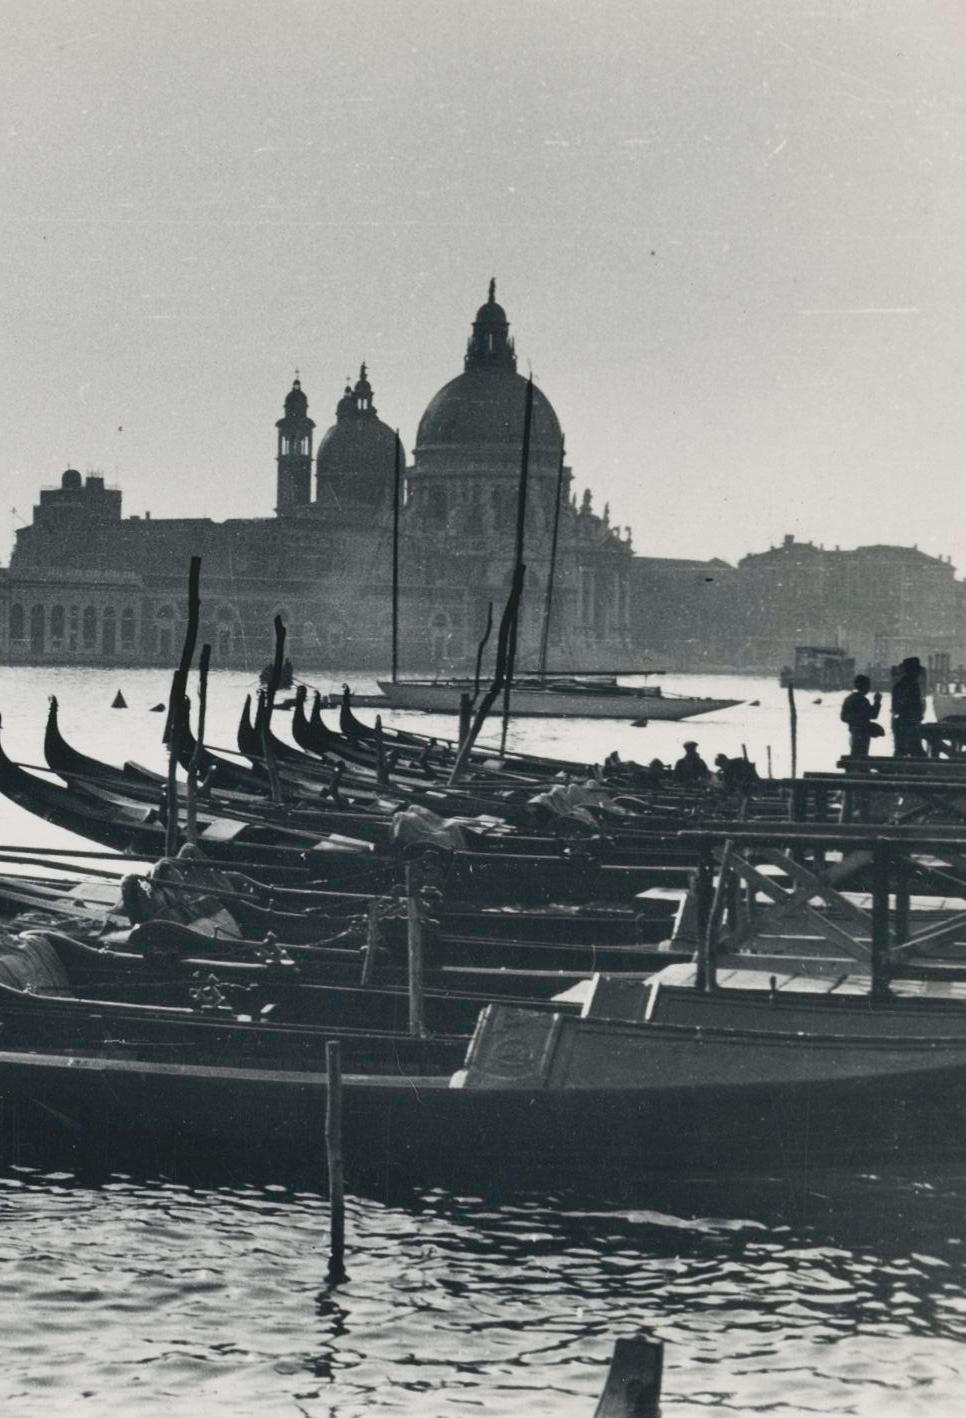 Venice, Gondolas, Black and White, Italy 1950s, 12, 8 x 17, 9 cm - Photograph by Erich Andres